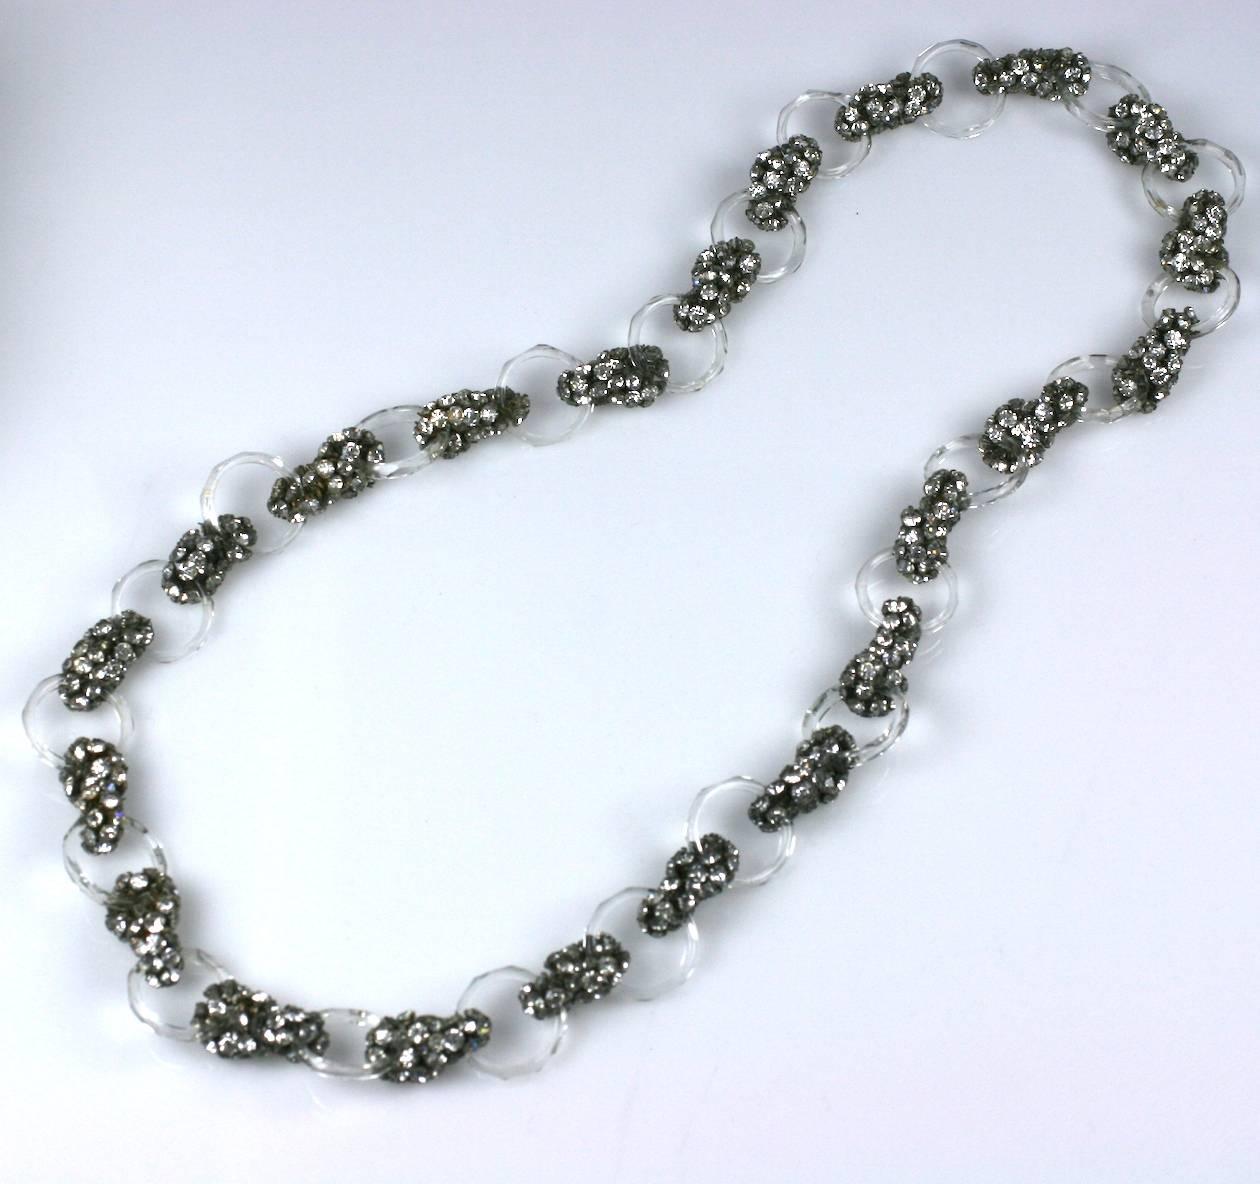 Art Deco Maison Gripoix faceted crystal ring and diamante cluster long flapper style sautoir. Hundreds of hand sewn pastes are used as connectors between the rings. 
This substantial necklace is imitative of the rage for rock crystal and diamond